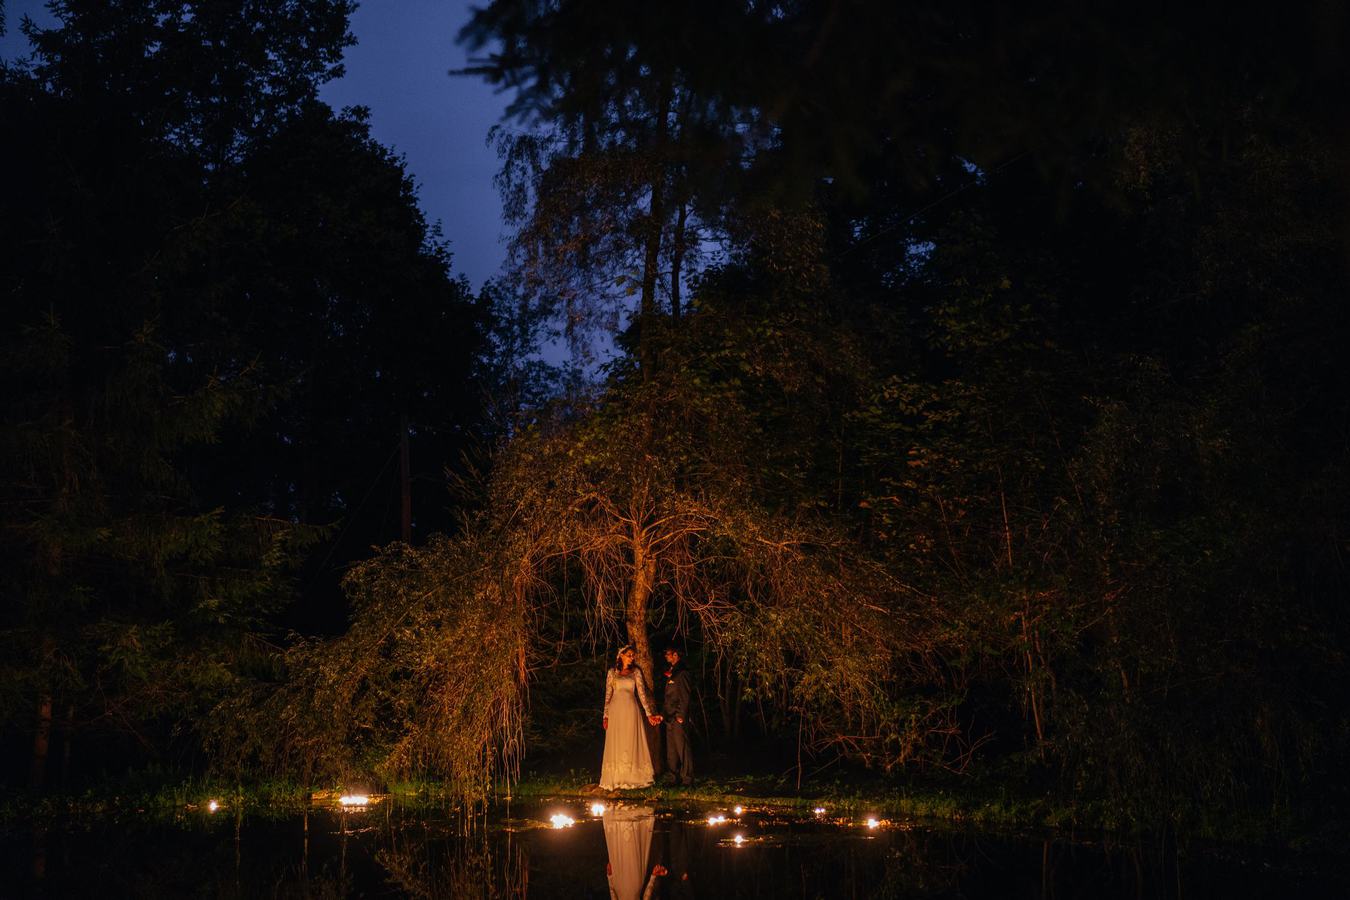 Bride and groom stand underneath tree by candle lit pond and hold hands at night at Catskill wedding venue.